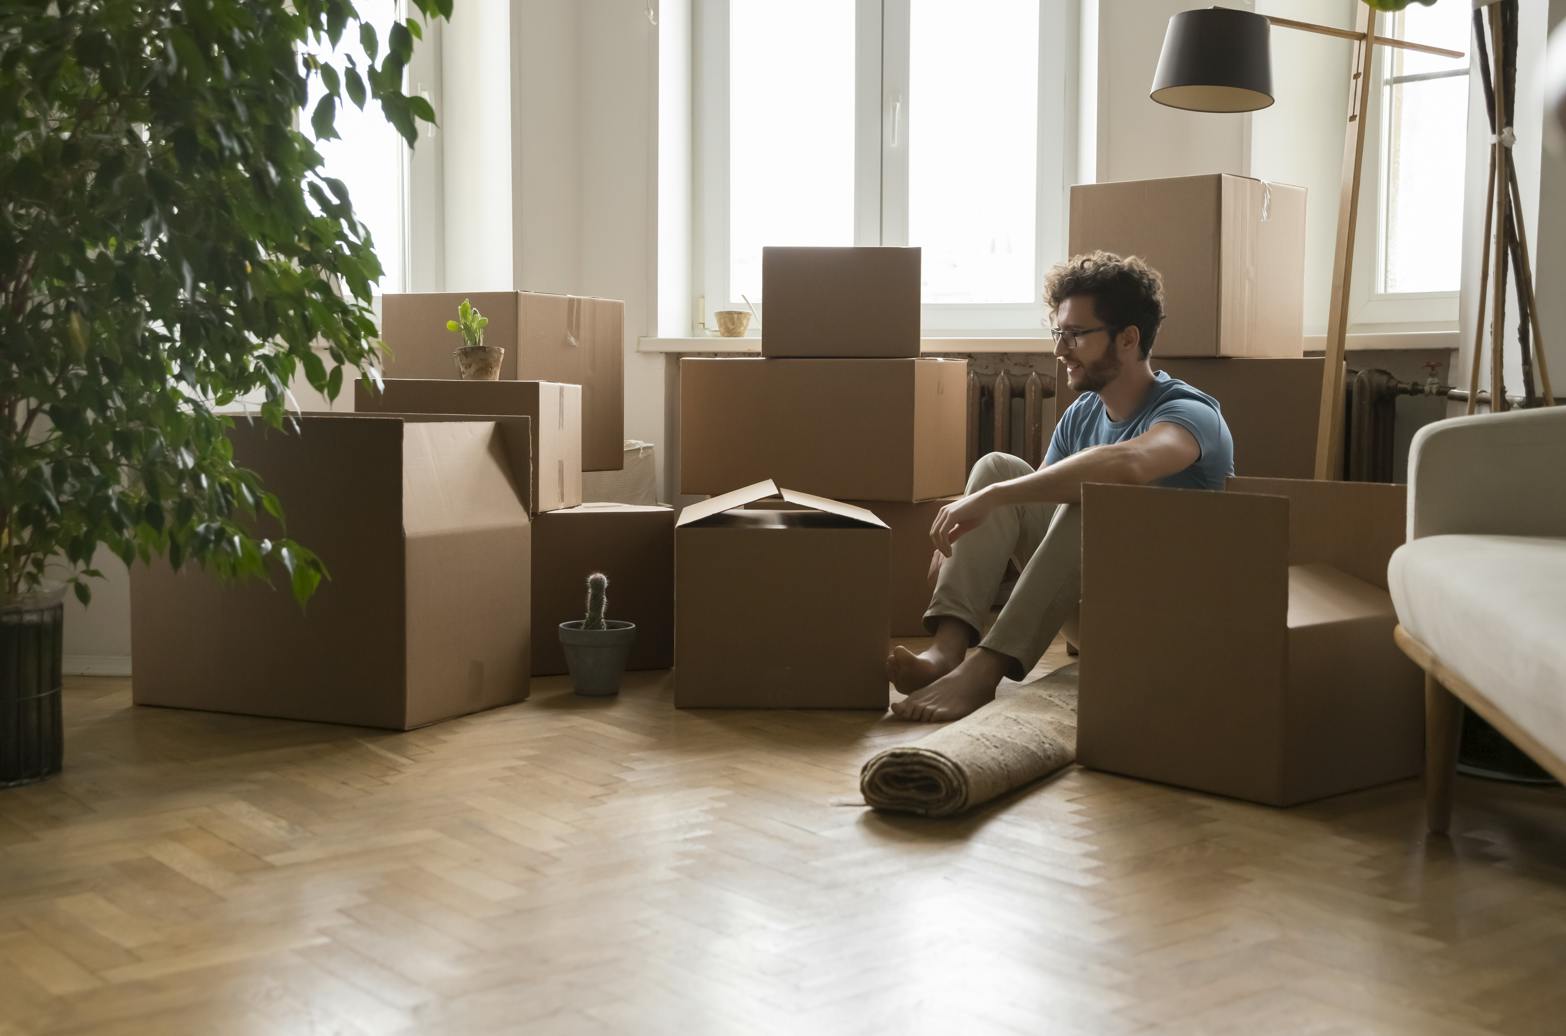 Man sits on the floor amid a pile of moving boxes after relocating